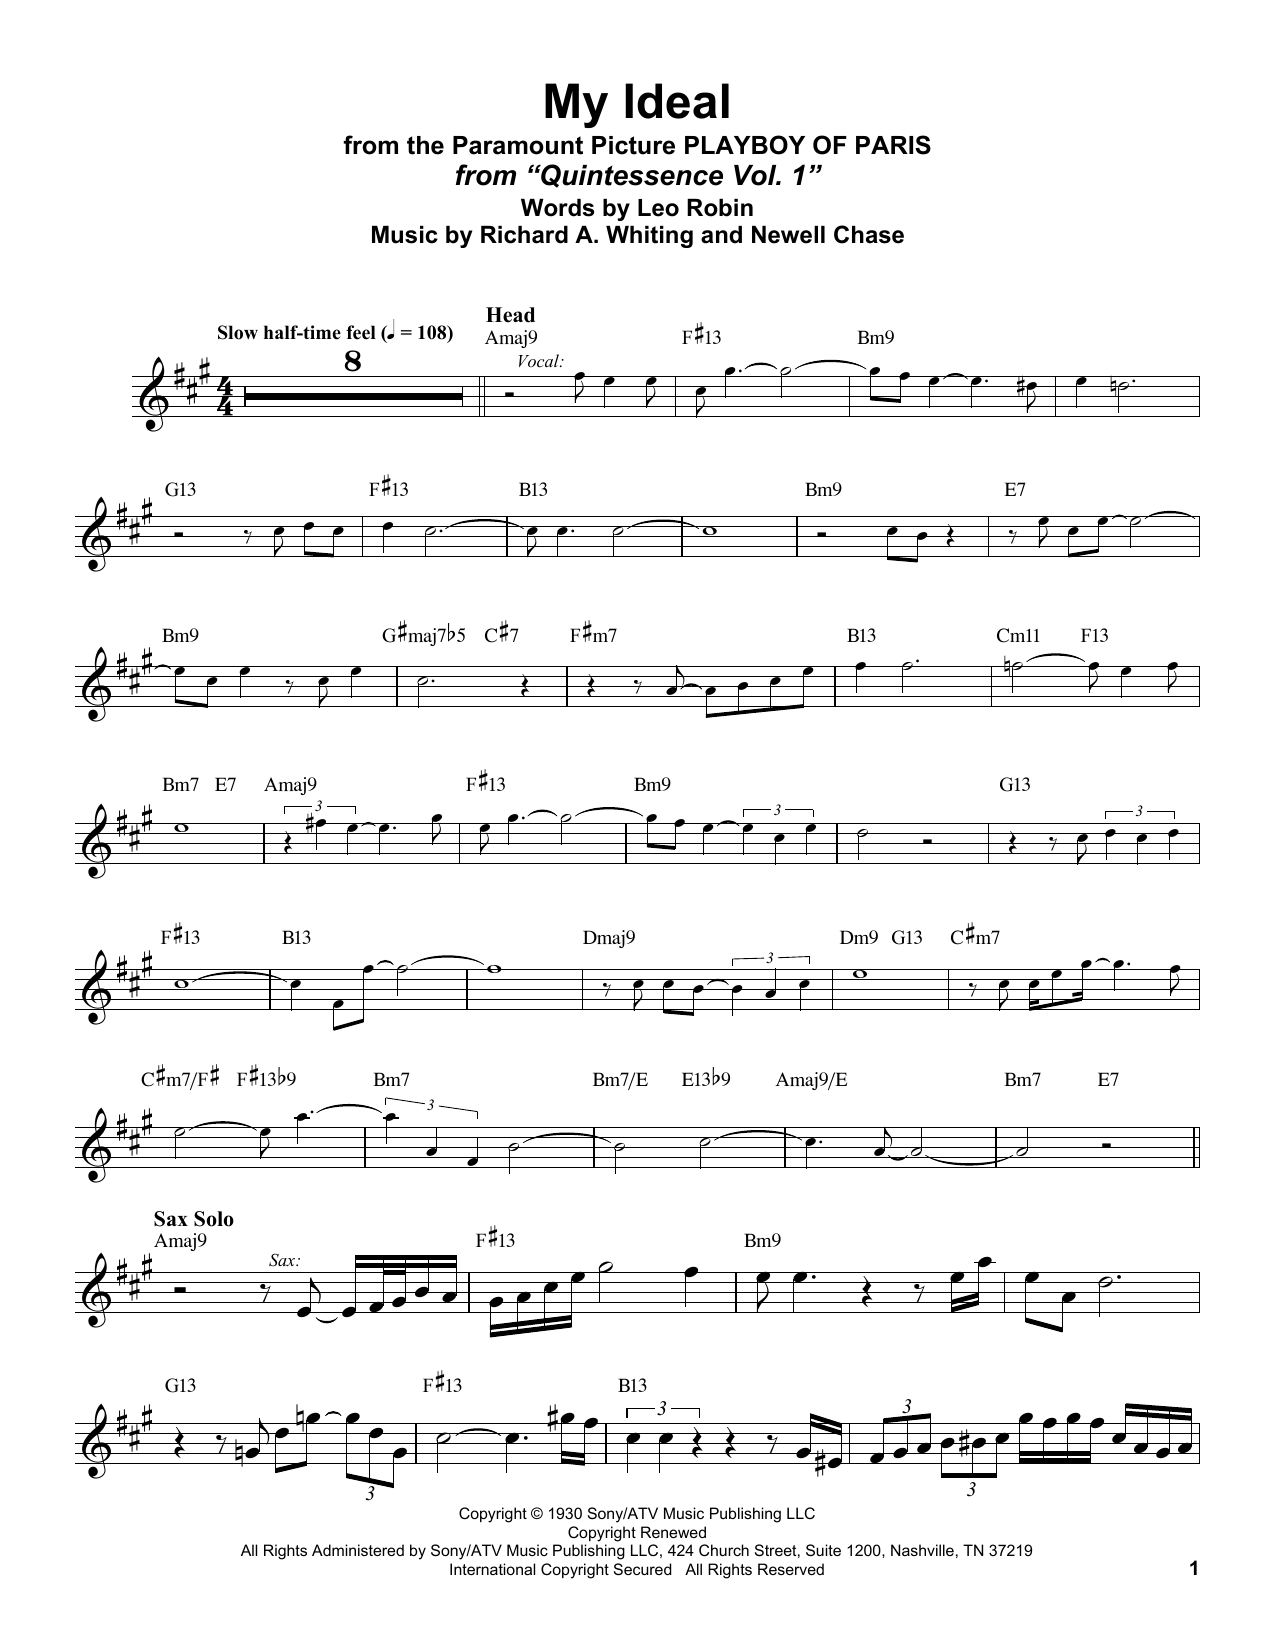 Download Stan Getz My Ideal (from Playboy of Paris) Sheet Music